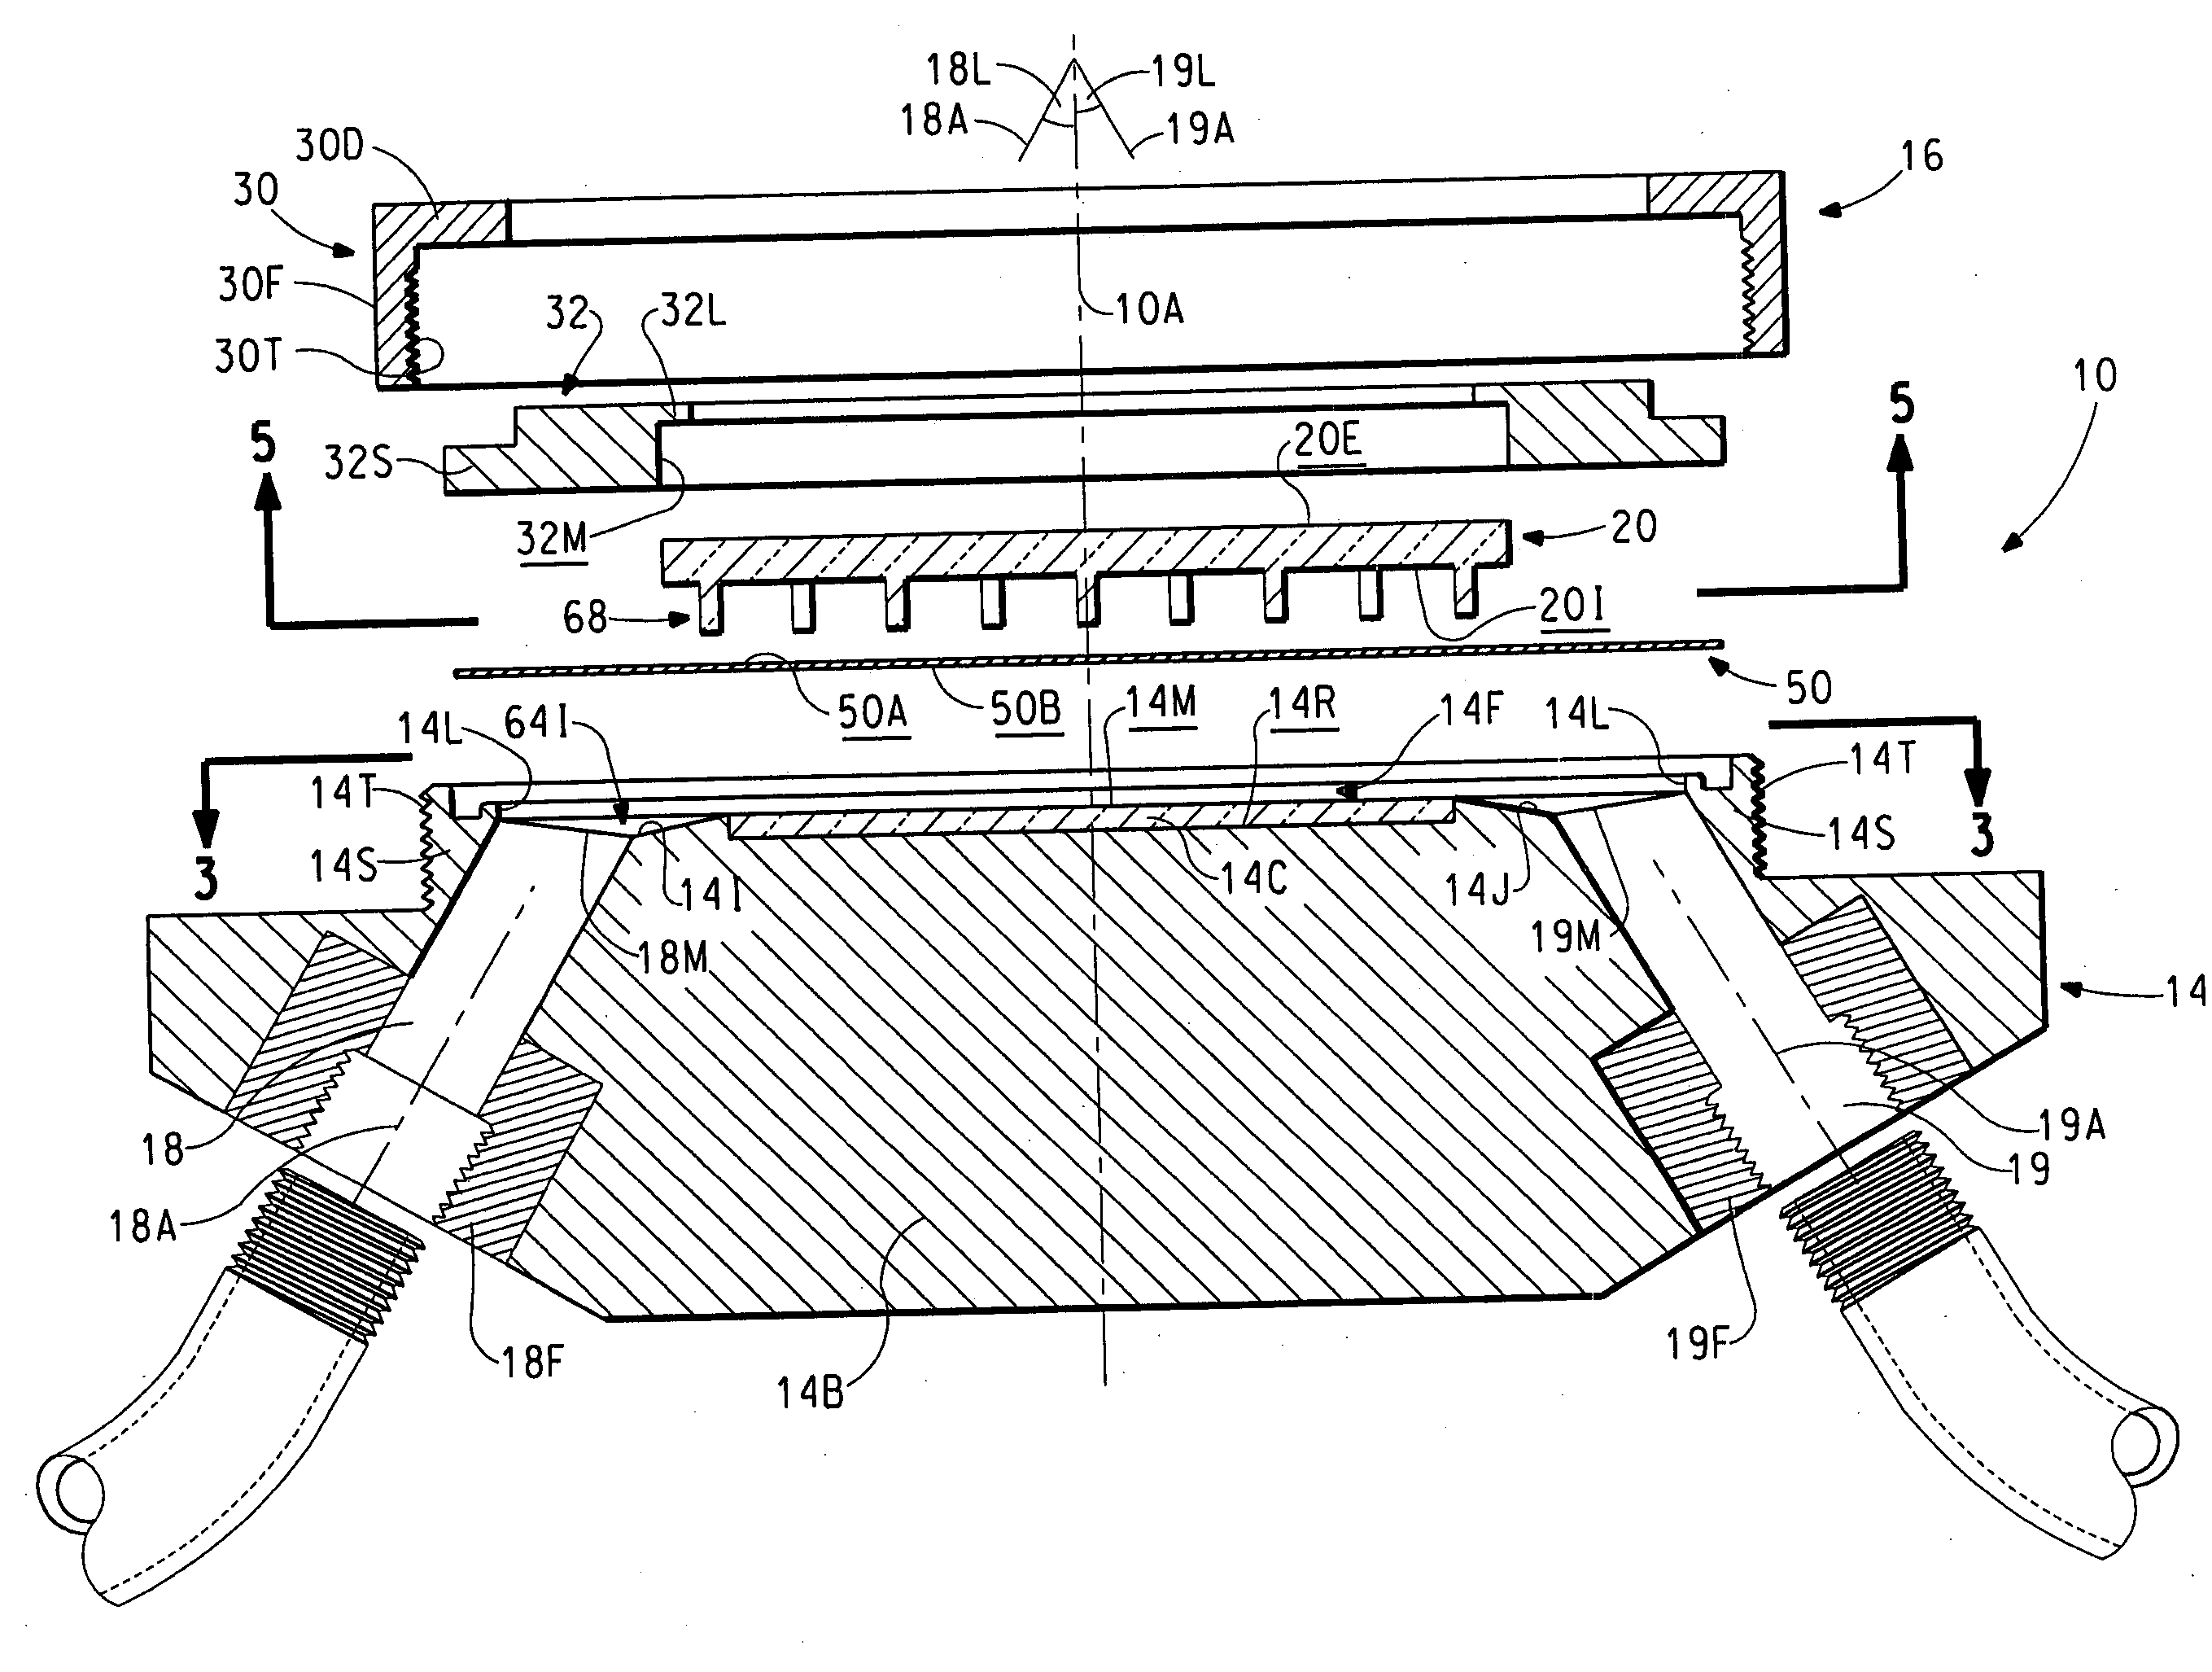 Liquid measurement cell having a transparent partition therein